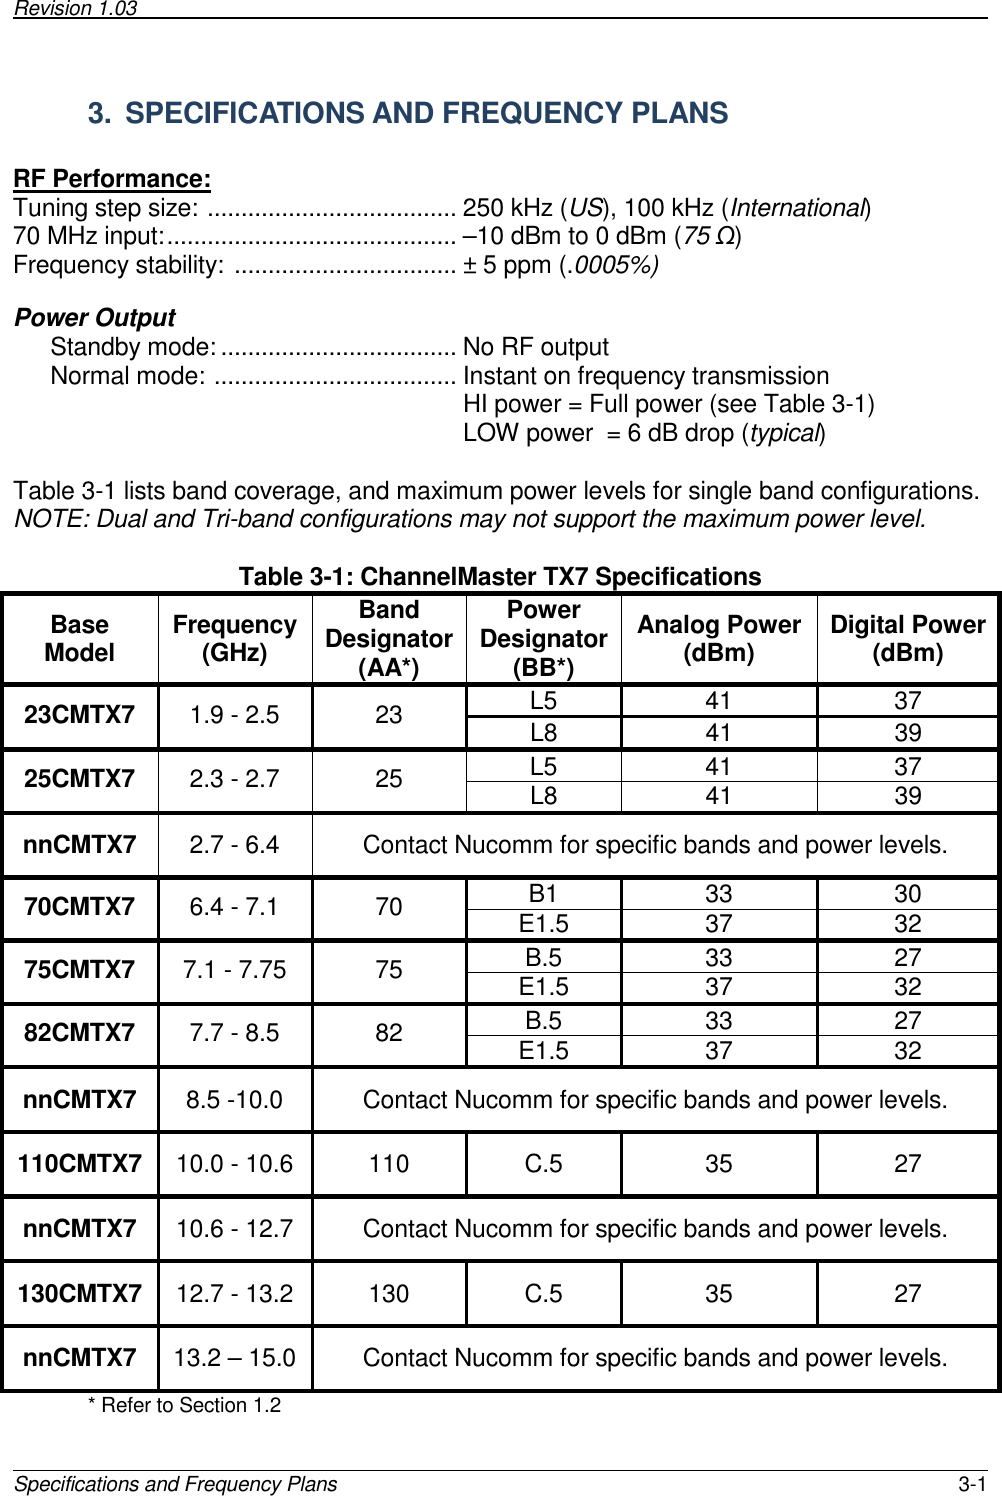 Revision 1.03        Specifications and Frequency Plans  3-1 3.  SPECIFICATIONS AND FREQUENCY PLANS  RF Performance: Tuning step size: ..................................... 250 kHz (US), 100 kHz (International) 70 MHz input:........................................... –10 dBm to 0 dBm (75 Ω) Frequency stability: ................................. ± 5 ppm (.0005%)  Power Output Standby mode: ................................... No RF output Normal mode: .................................... Instant on frequency transmission HI power = Full power (see Table 3-1) LOW power  = 6 dB drop (typical)  Table 3-1 lists band coverage, and maximum power levels for single band configurations.  NOTE: Dual and Tri-band configurations may not support the maximum power level.  Table 3-1: ChannelMaster TX7 Specifications Base Model  Frequency (GHz) Band Designator (AA*) Power Designator (BB*) Analog Power (dBm)  Digital Power (dBm) L5  41  37 23CMTX7  1.9 - 2.5  23  L8  41  39 L5  41  37 25CMTX7  2.3 - 2.7  25  L8  41  39 nnCMTX7  2.7 - 6.4  Contact Nucomm for specific bands and power levels. B1  33  30 70CMTX7  6.4 - 7.1  70  E1.5  37  32 B.5  33  27 75CMTX7  7.1 - 7.75  75  E1.5  37  32 B.5  33  27 82CMTX7  7.7 - 8.5  82  E1.5  37  32 nnCMTX7  8.5 -10.0  Contact Nucomm for specific bands and power levels. 110CMTX7  10.0 - 10.6  110  C.5  35  27 nnCMTX7  10.6 - 12.7  Contact Nucomm for specific bands and power levels. 130CMTX7  12.7 - 13.2  130  C.5  35  27 nnCMTX7  13.2 – 15.0  Contact Nucomm for specific bands and power levels. * Refer to Section 1.2 